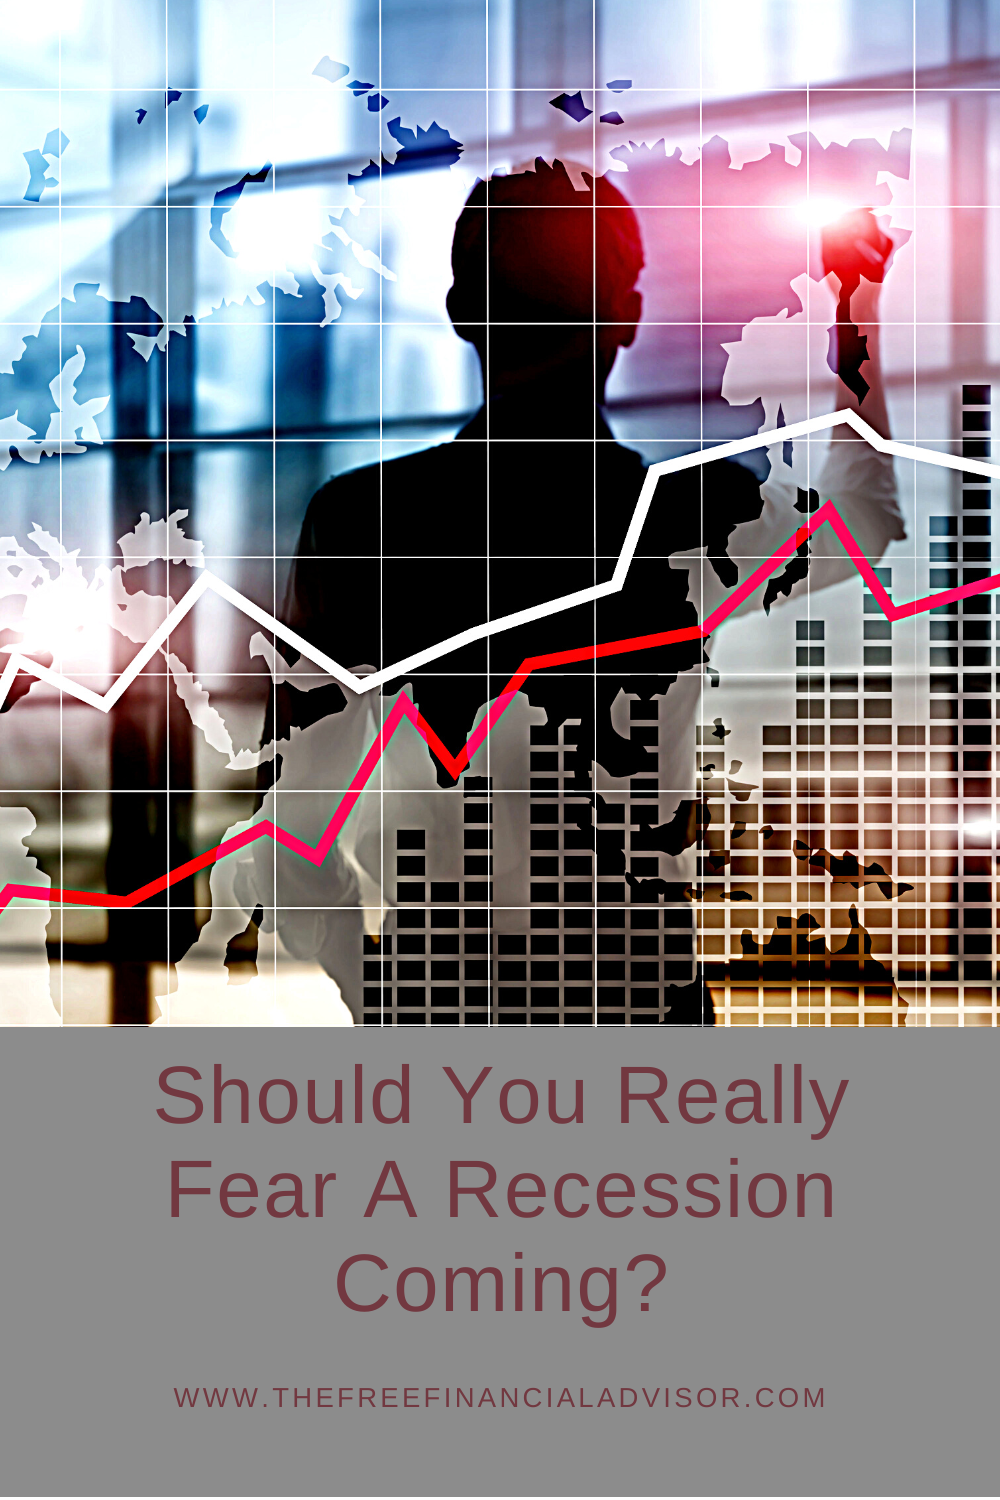 Should You Really Fear A Recession Coming